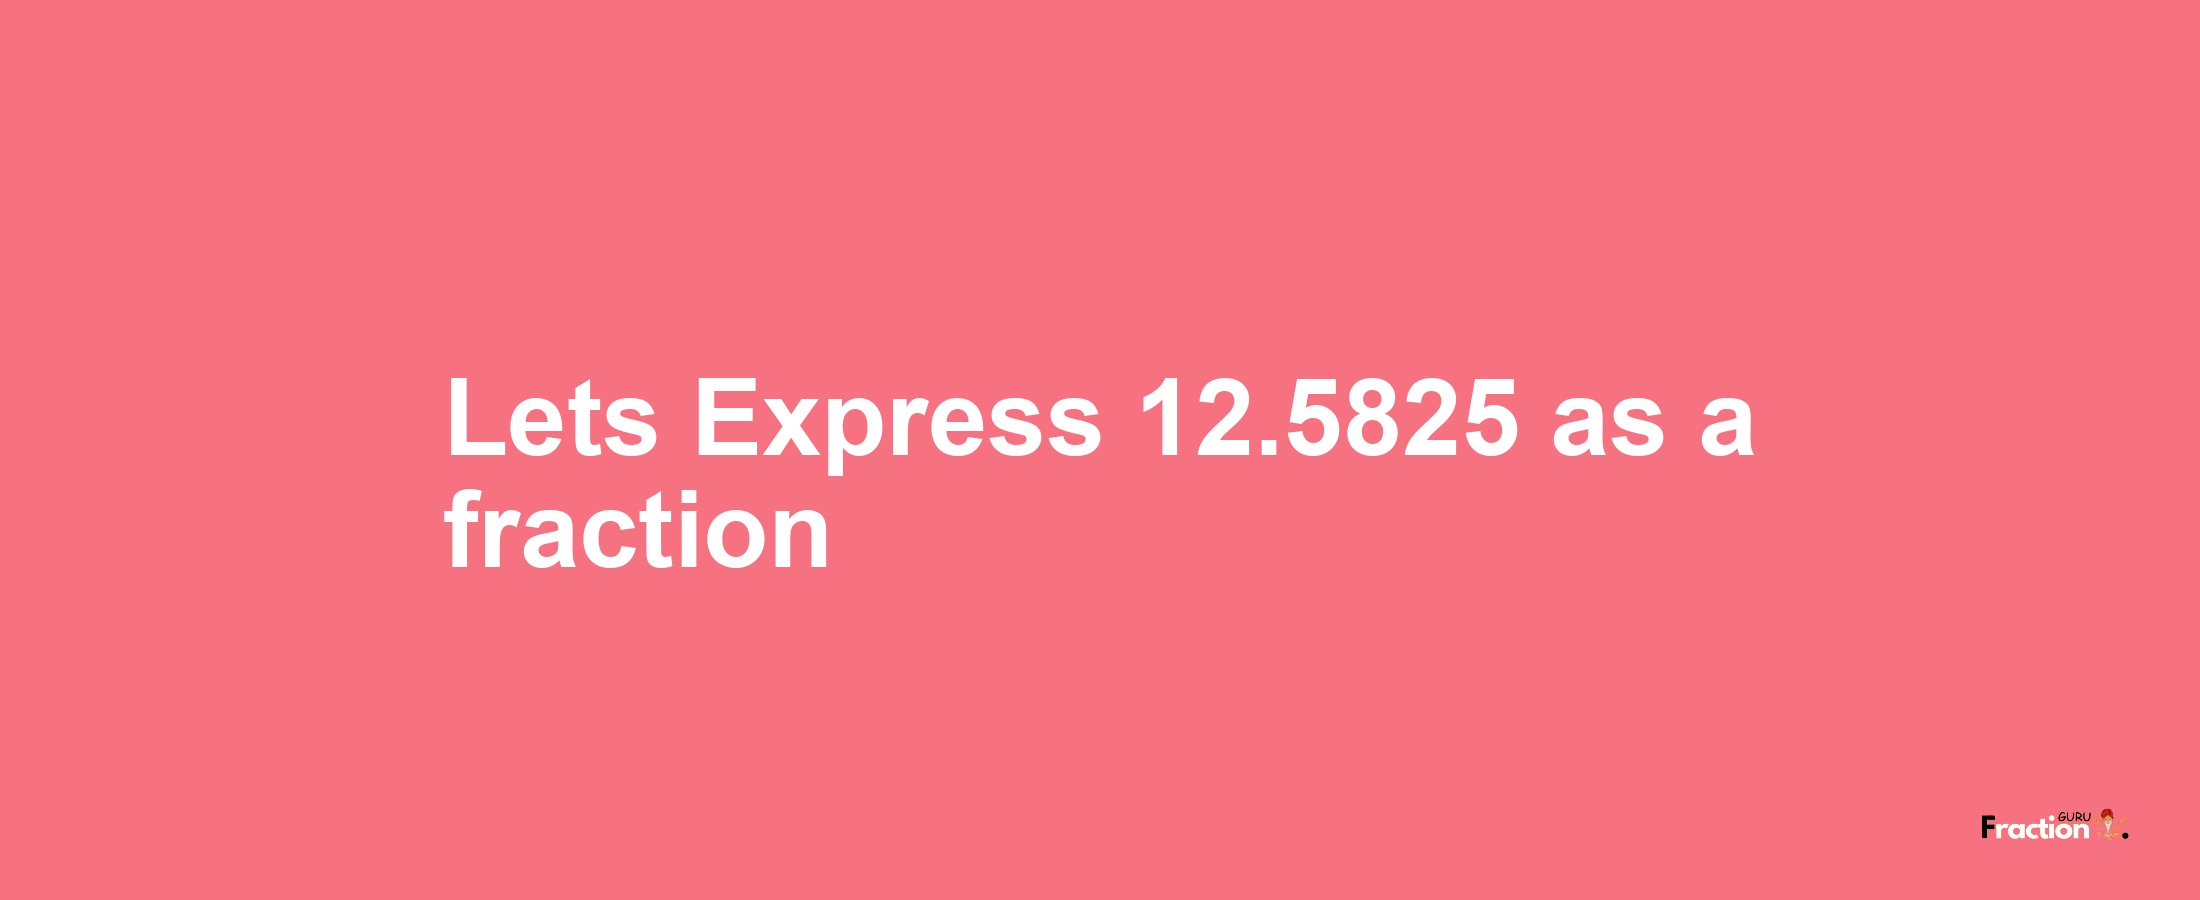 Lets Express 12.5825 as afraction